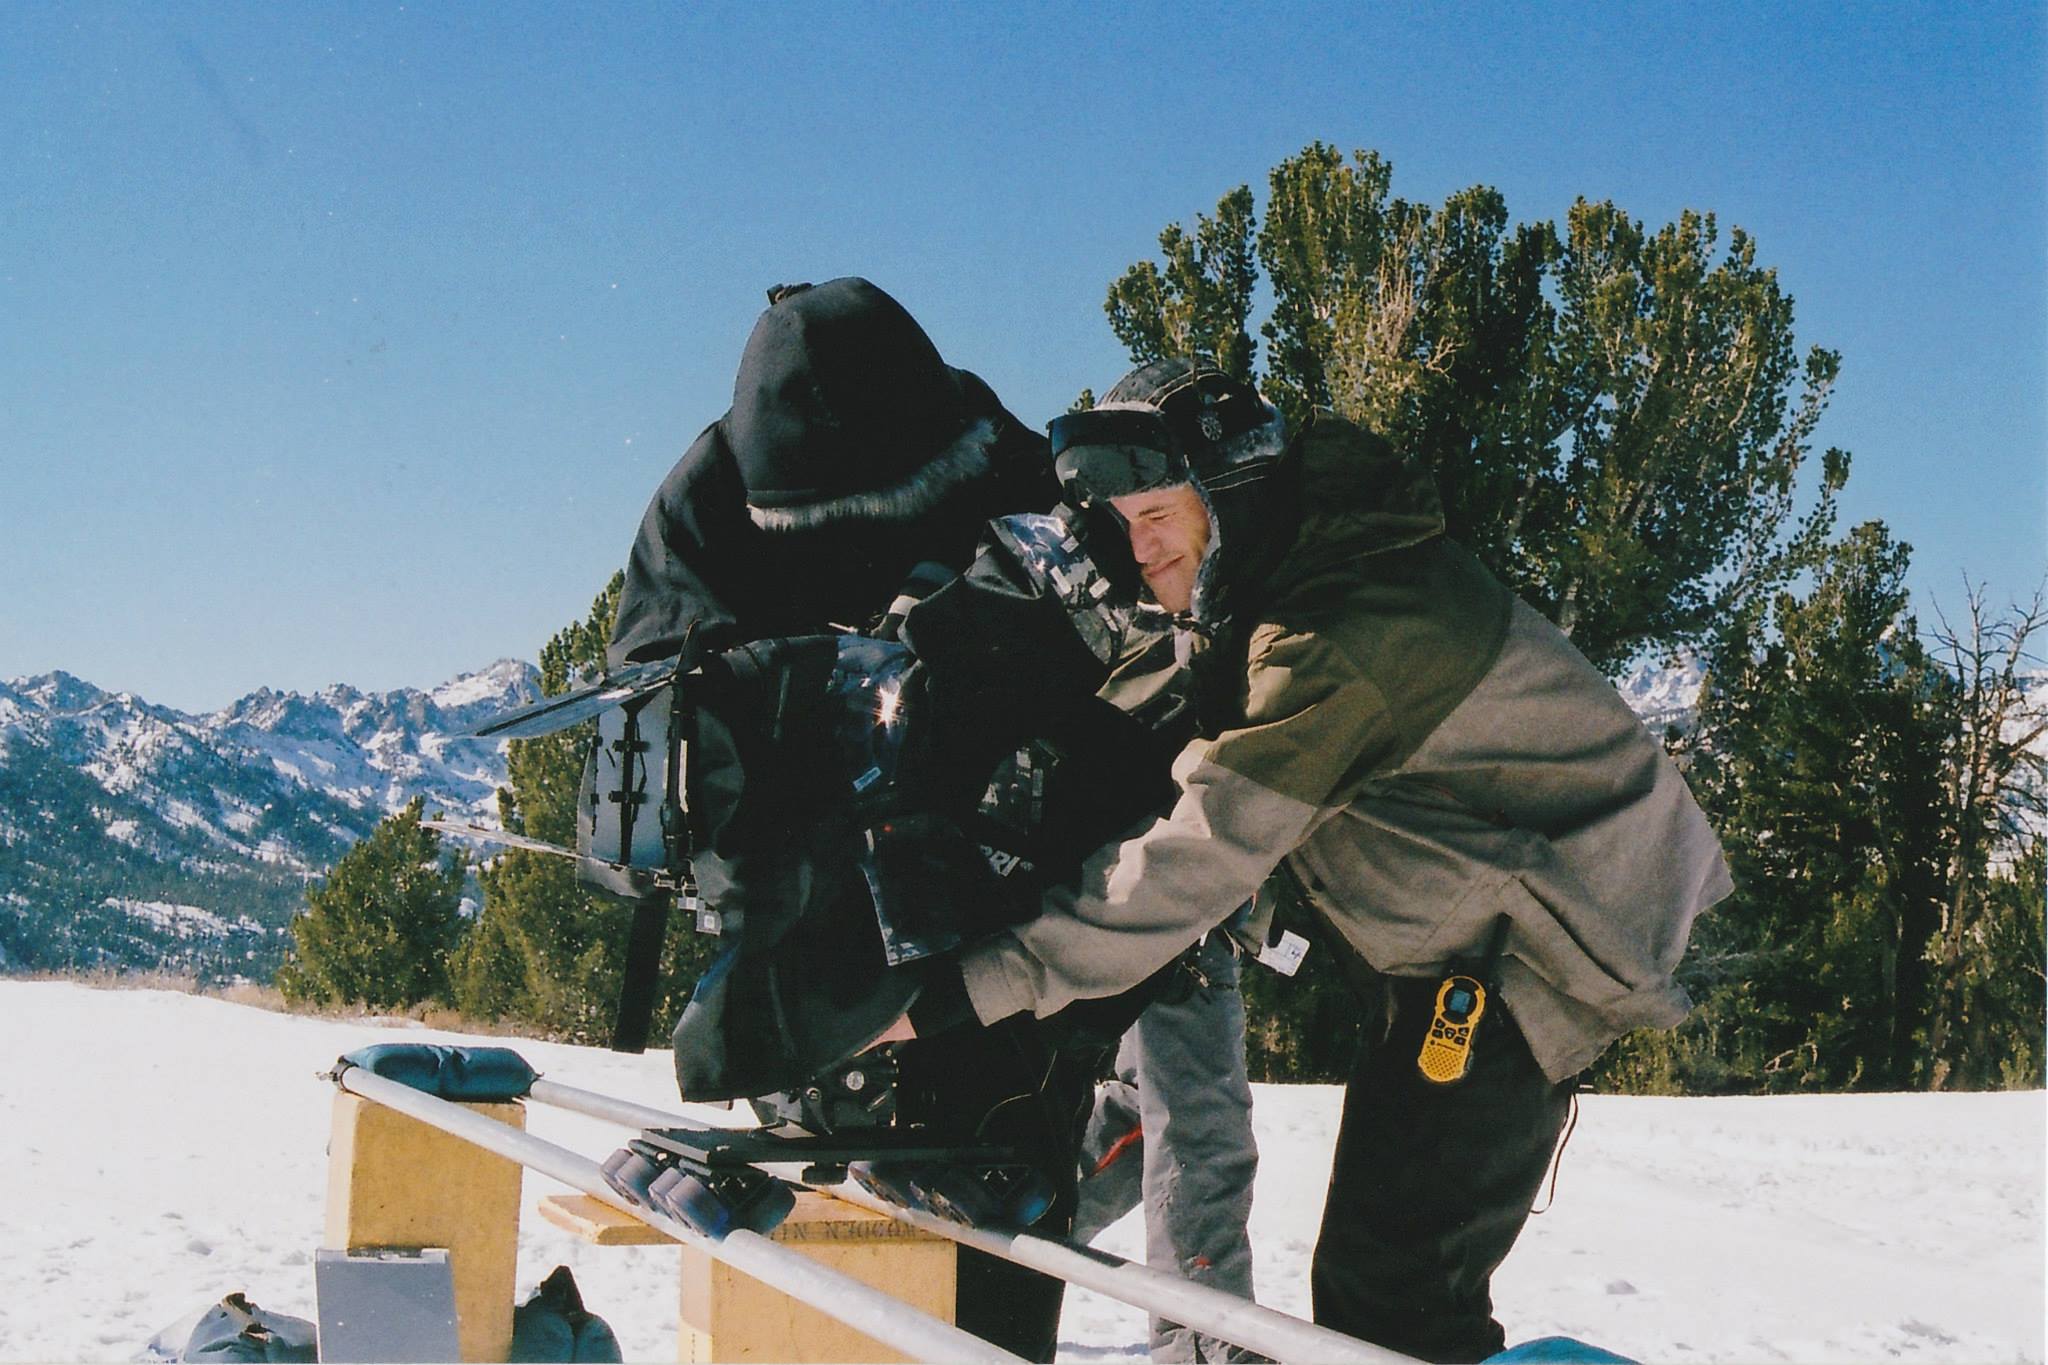 On Location - Scene One Filming, What Child Is This 1-24-15, sunrise at Ansel Adams Wilderness Area-Kyle Klebe on the Alexa